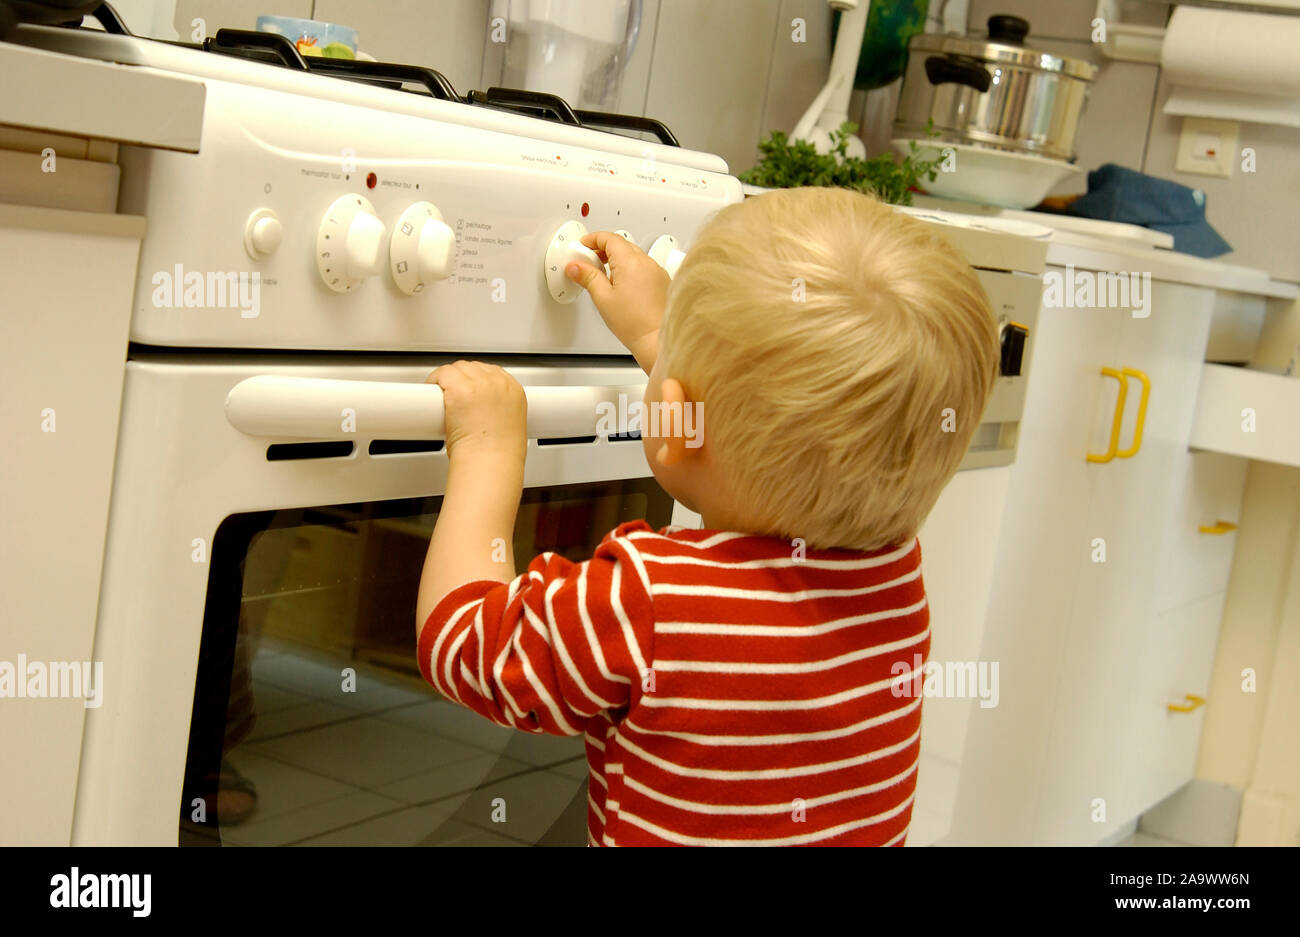 Child playing with cooker dial Stock Photo